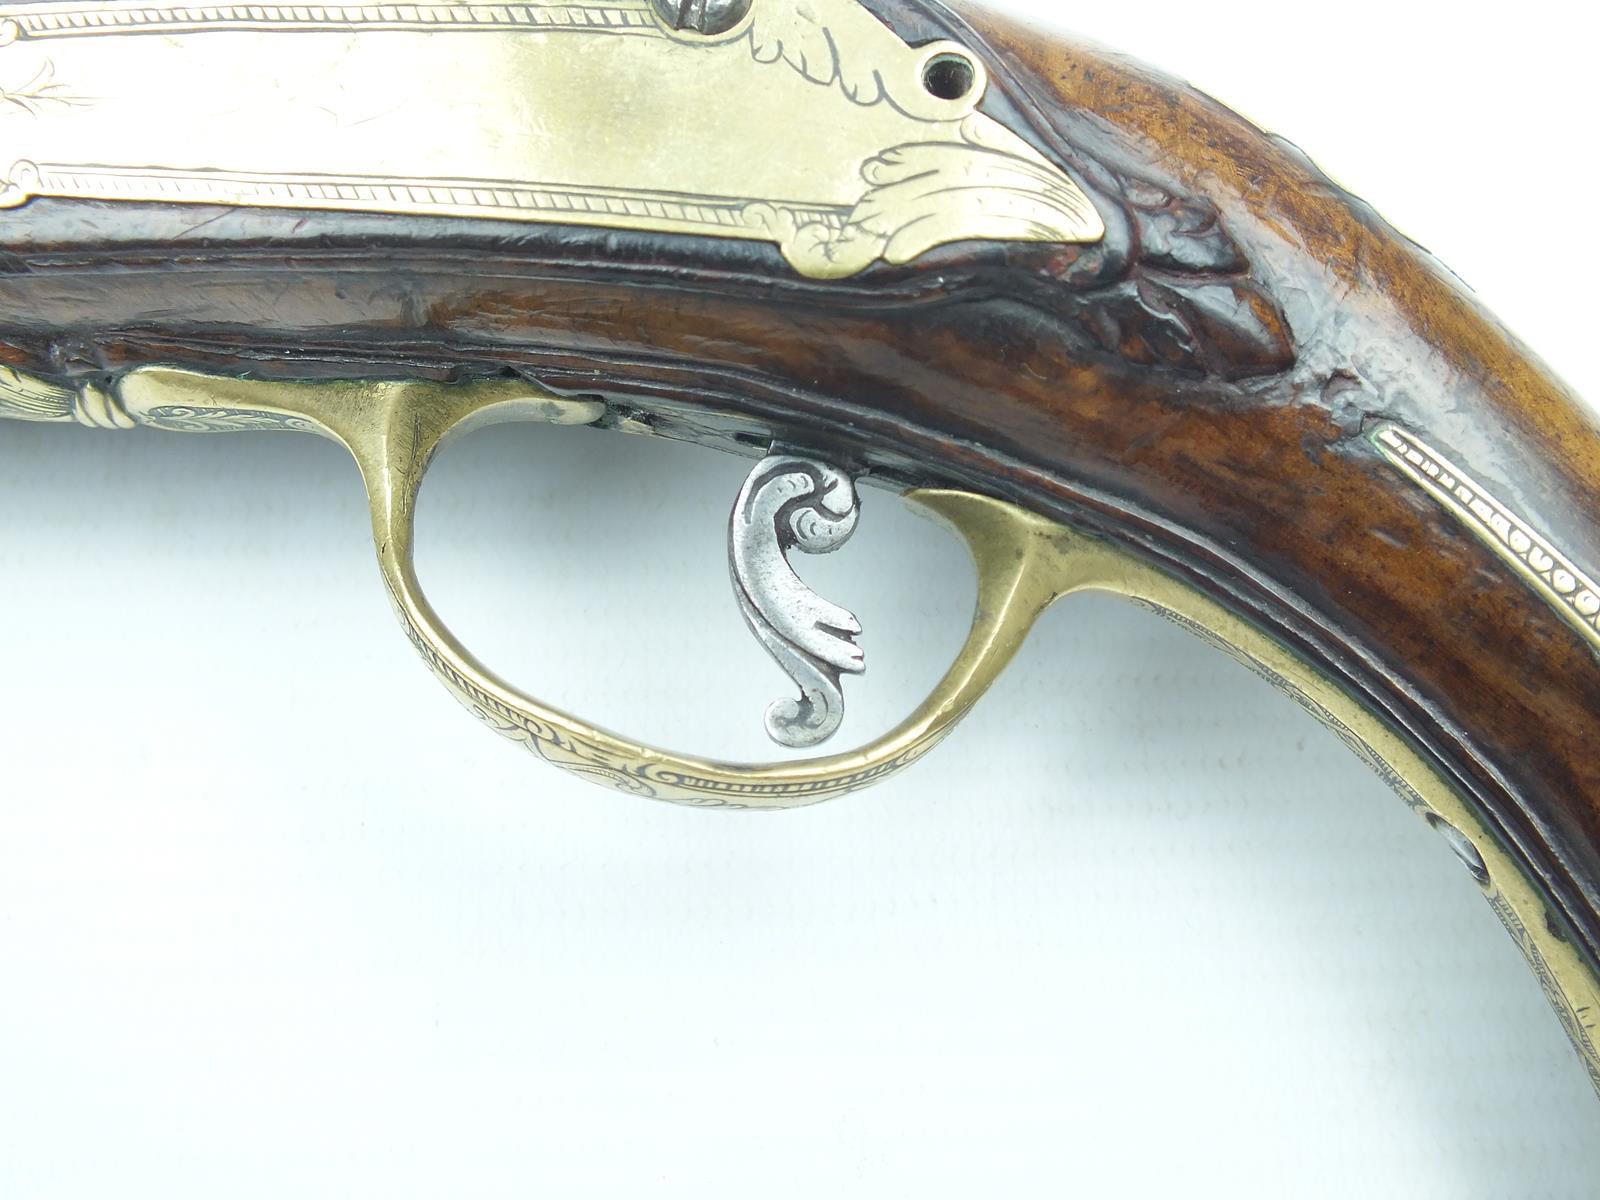 A 40-bore Tusco-Emilian snaphaunce travelling pistol by Brento, 6.75inch two-stage swamped barrel, - Image 4 of 10